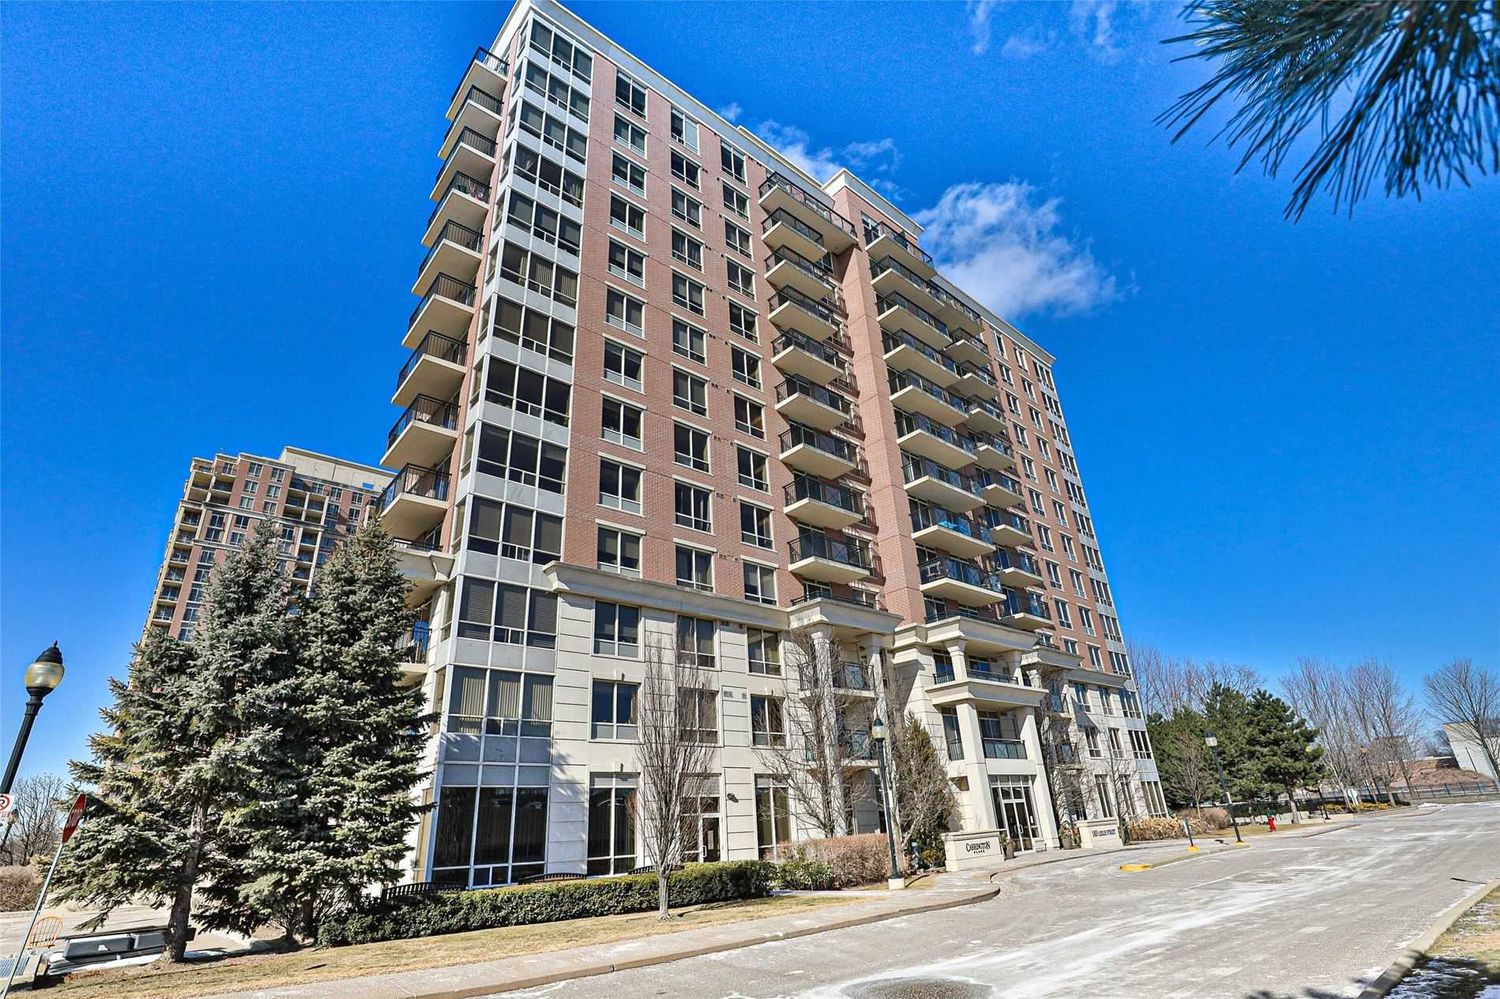 1103 Leslie Street. Carrington Place Condos is located in  North York, Toronto - image #2 of 3